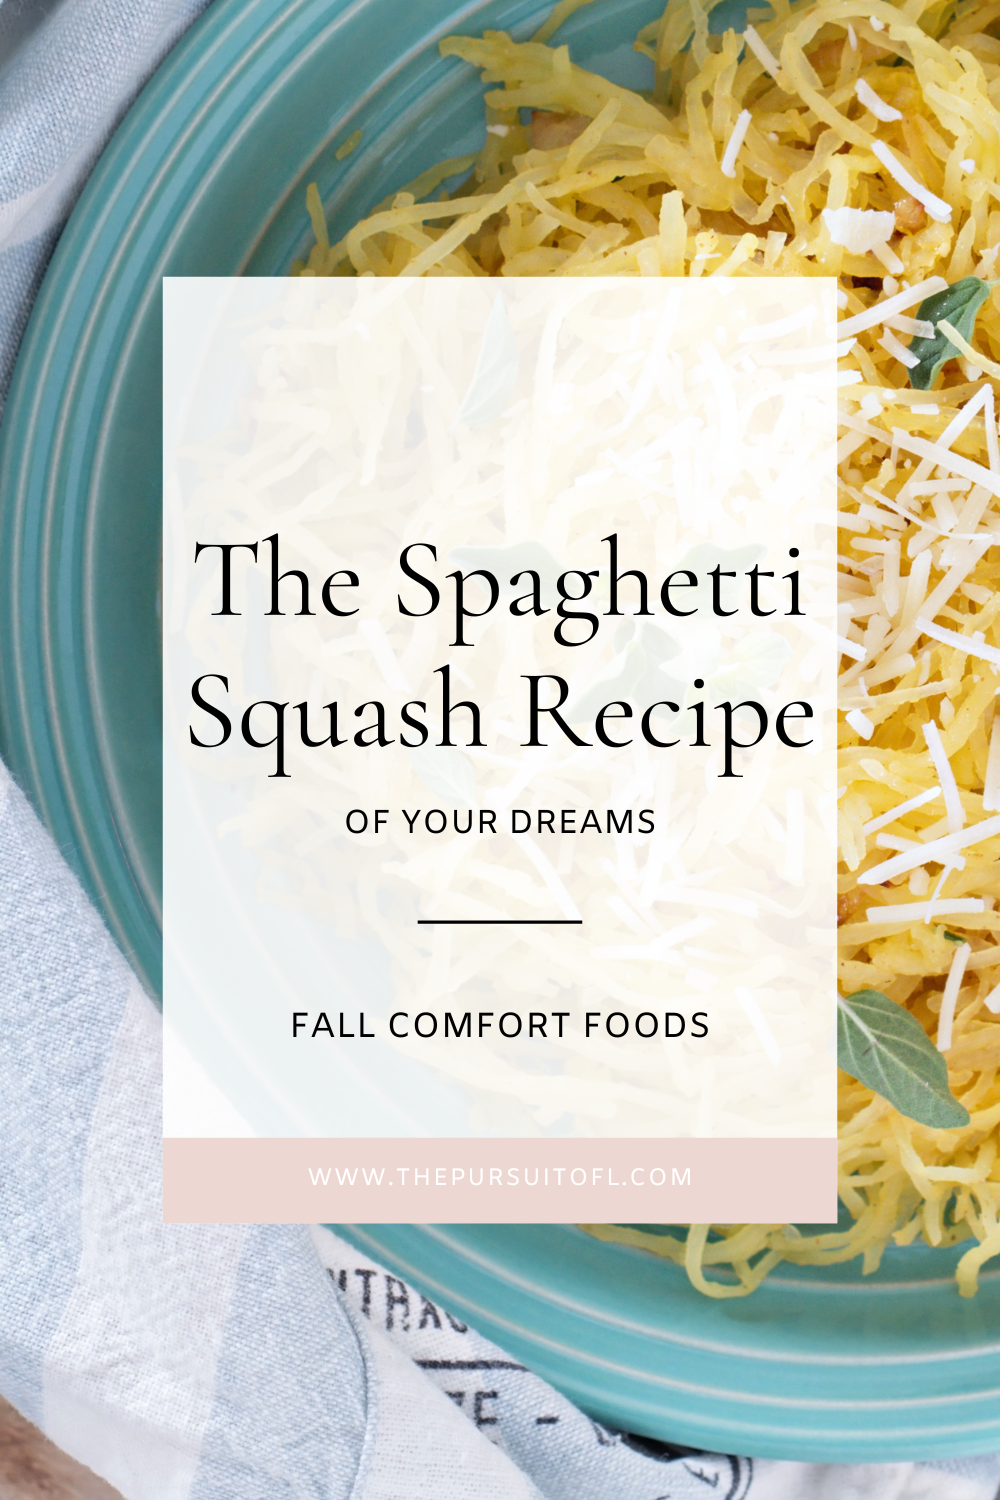 The Spaghetti Squash Recipe of Your Dreams, Pinterest Image, The Pursuit of L, Fall Comfort Foods